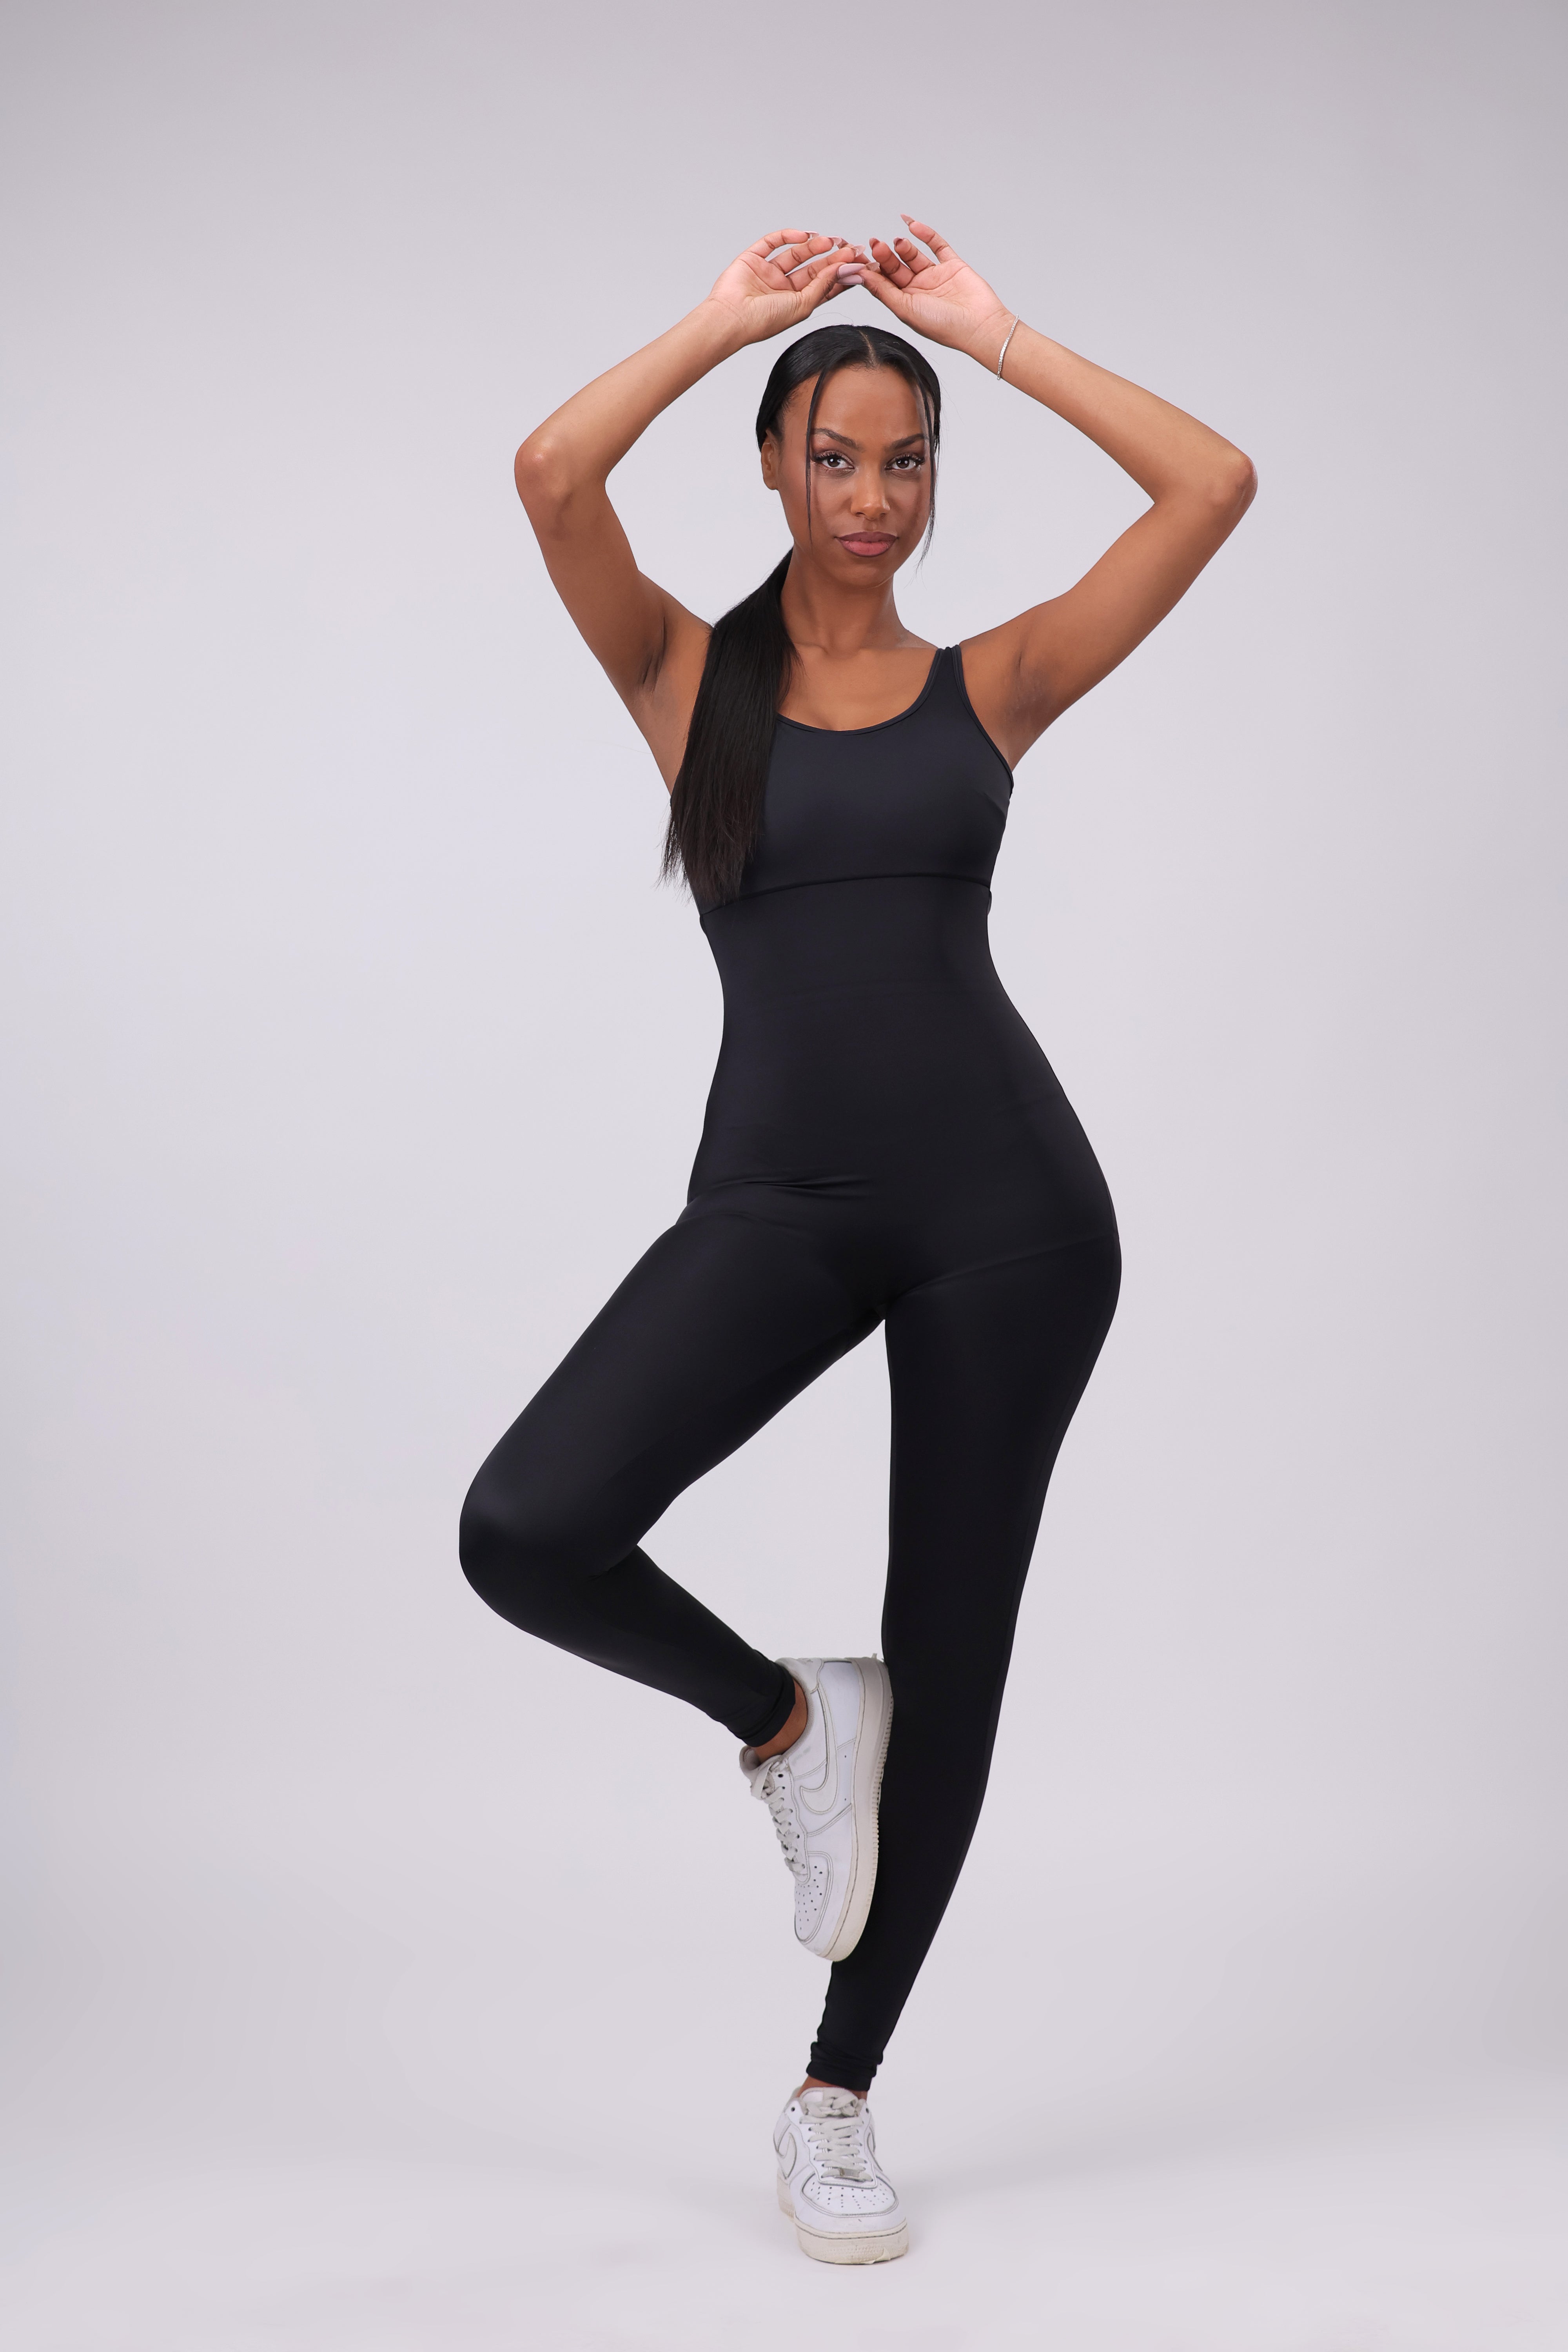 Built-In Shapewear Thigh Slimming Workout Jumpsuit